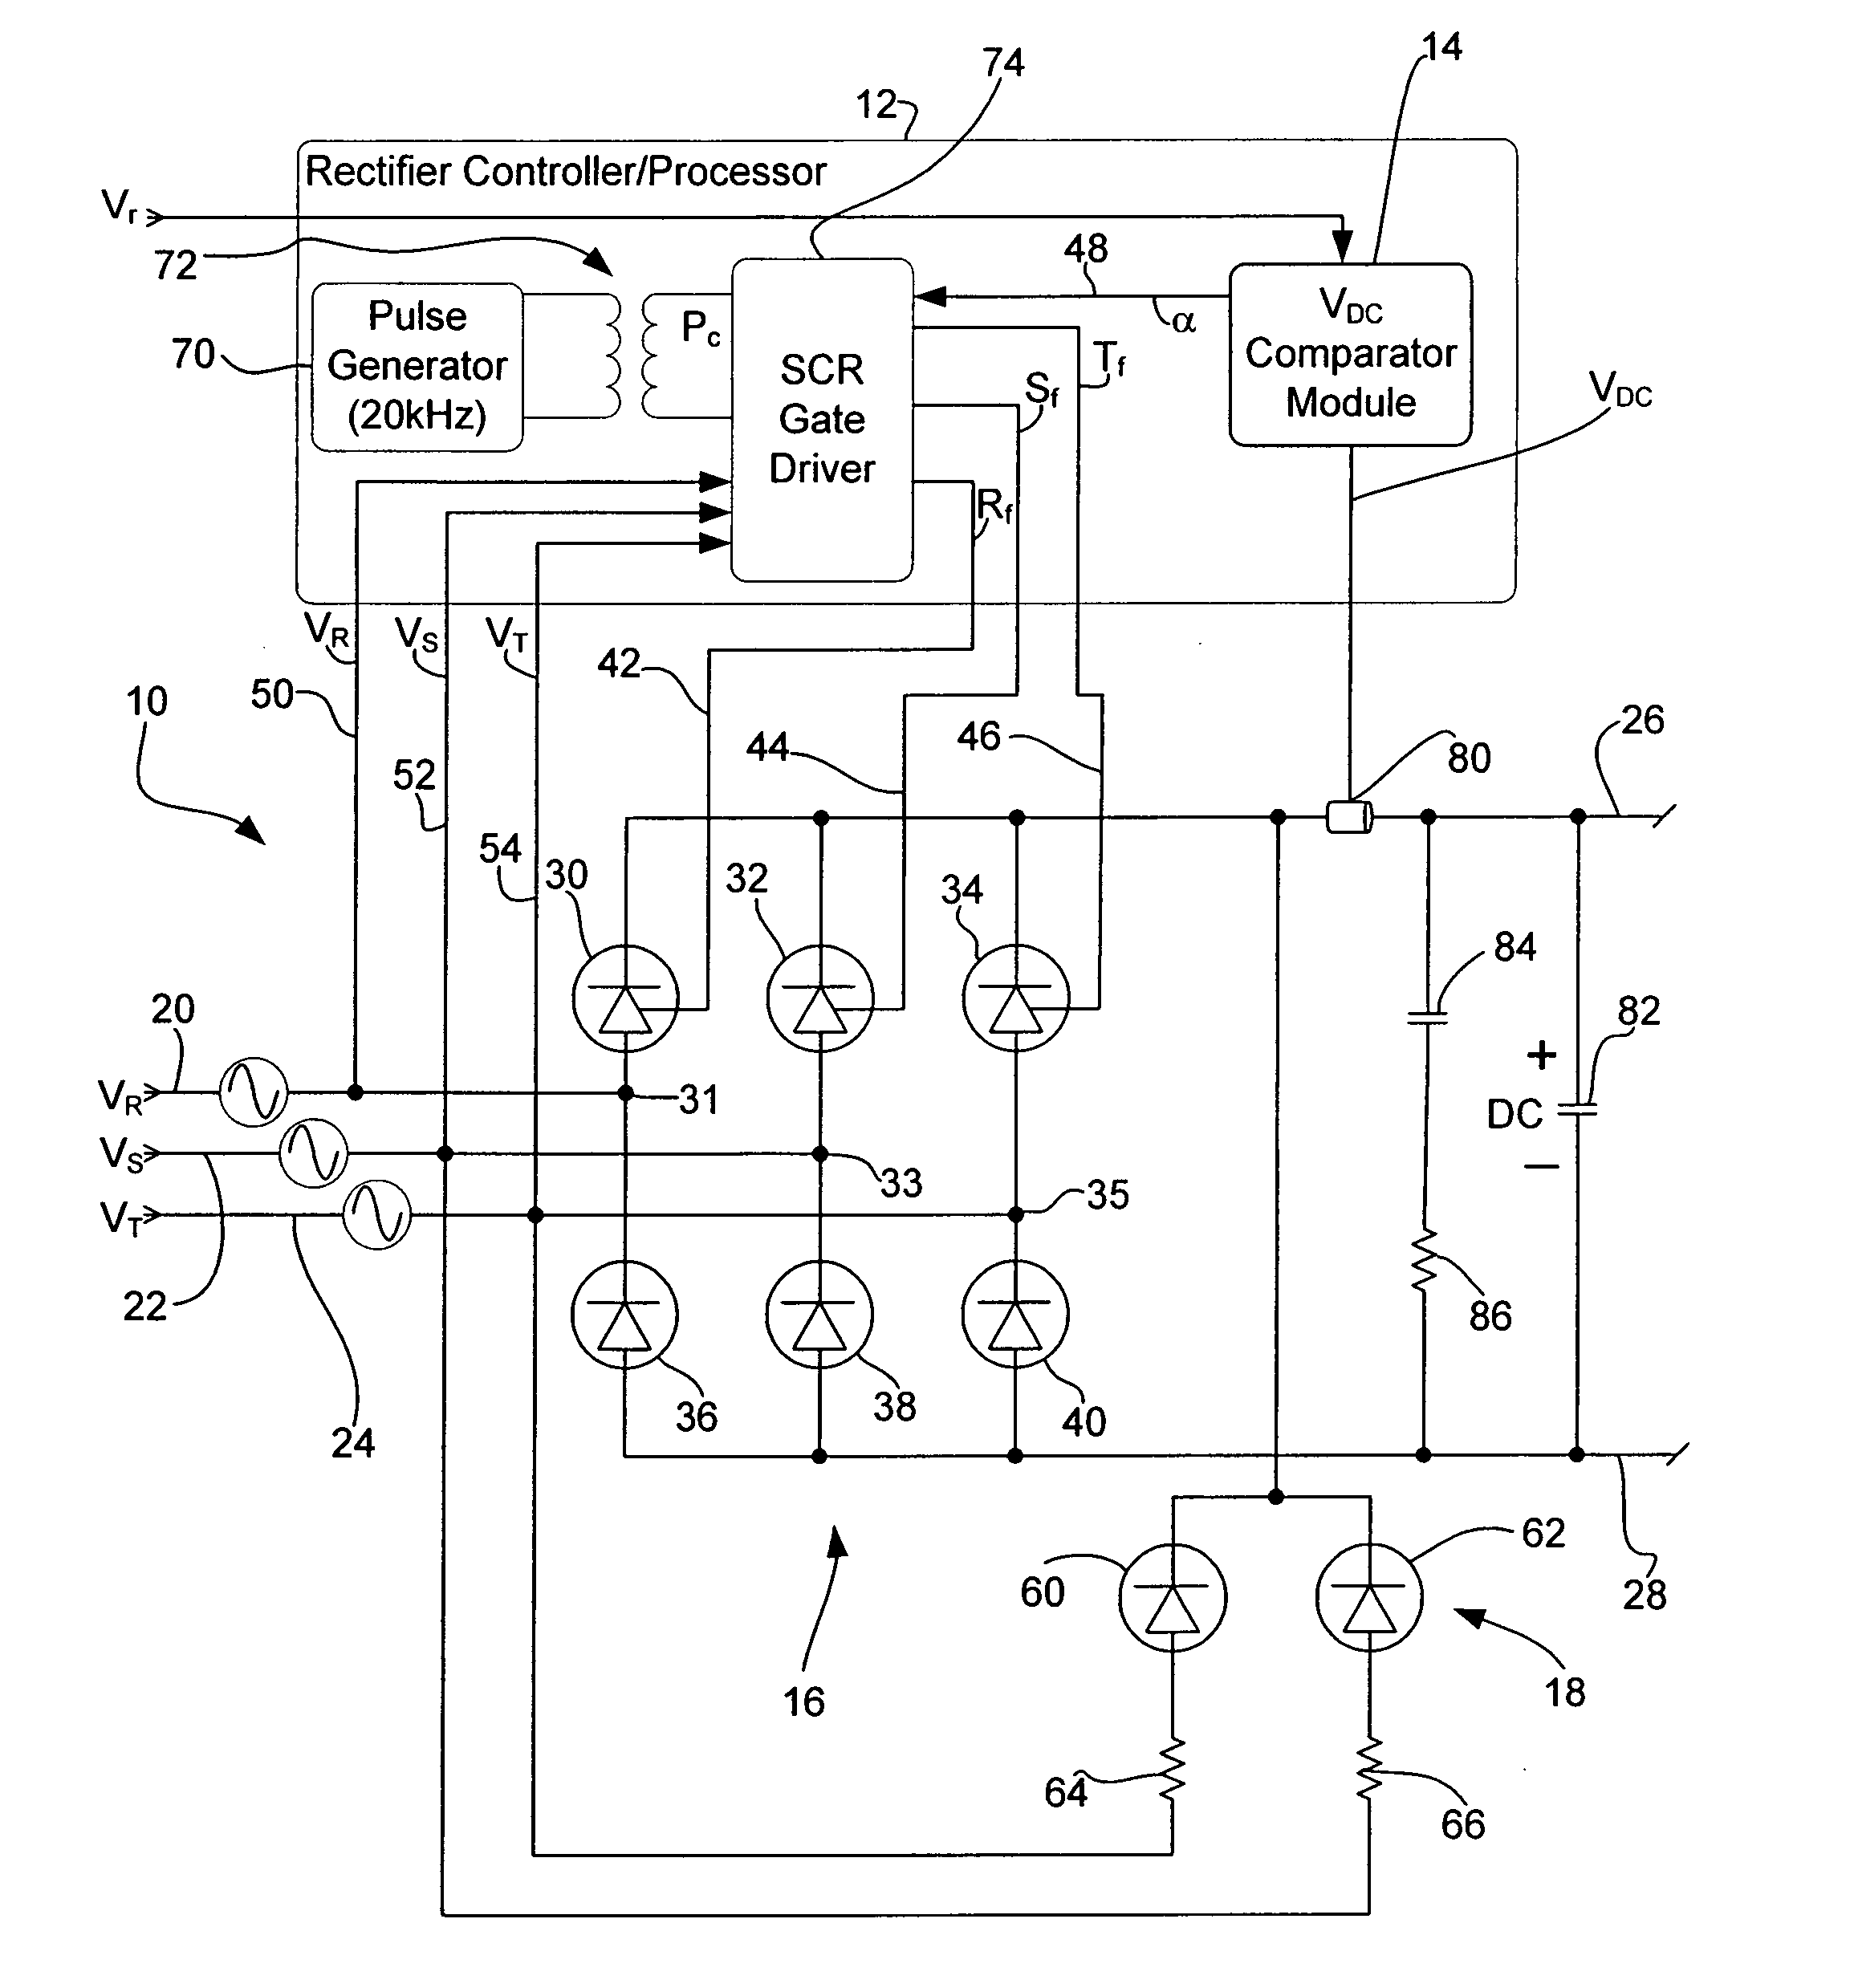 Method and apparatus for DC bus capacitor pre-charge